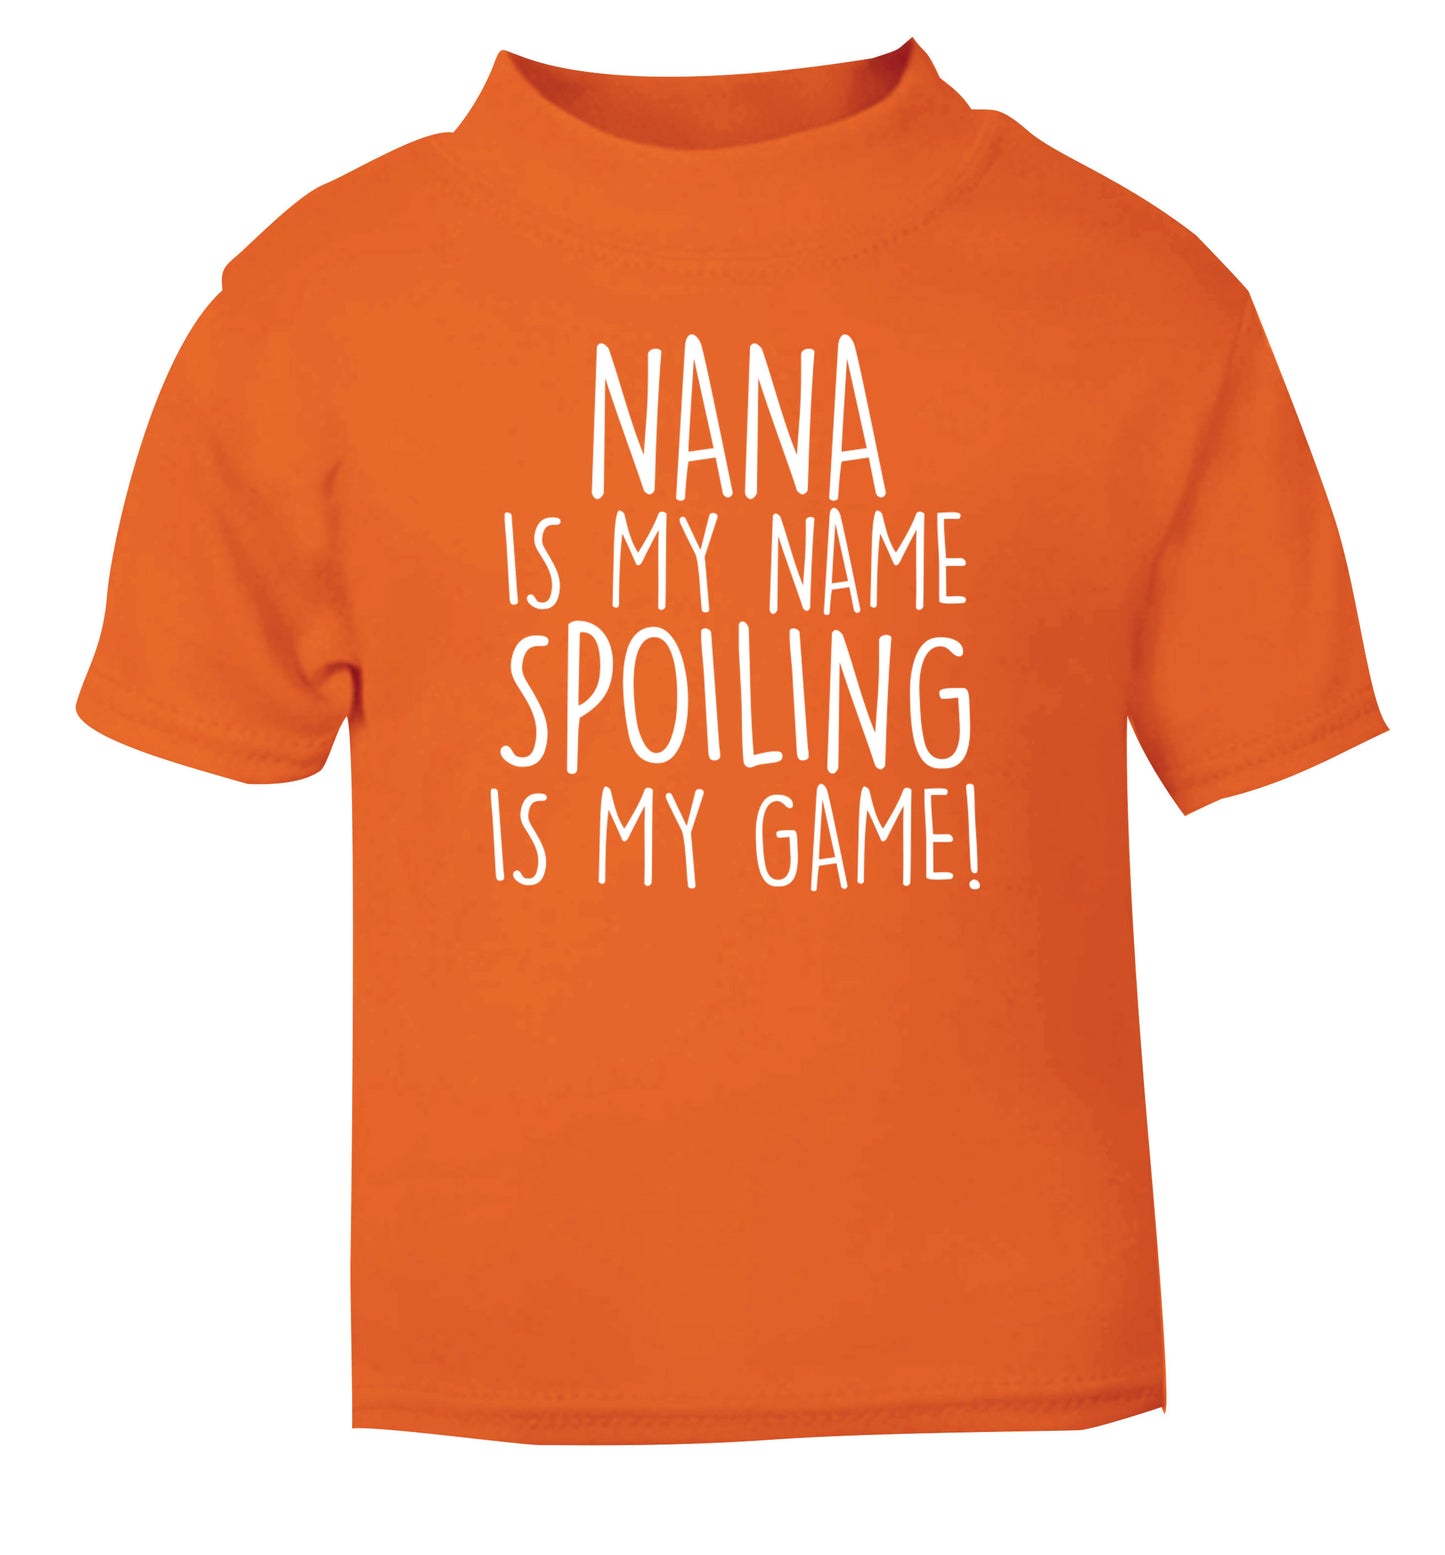 Nana is my name, spoiling is my game orange Baby Toddler Tshirt 2 Years